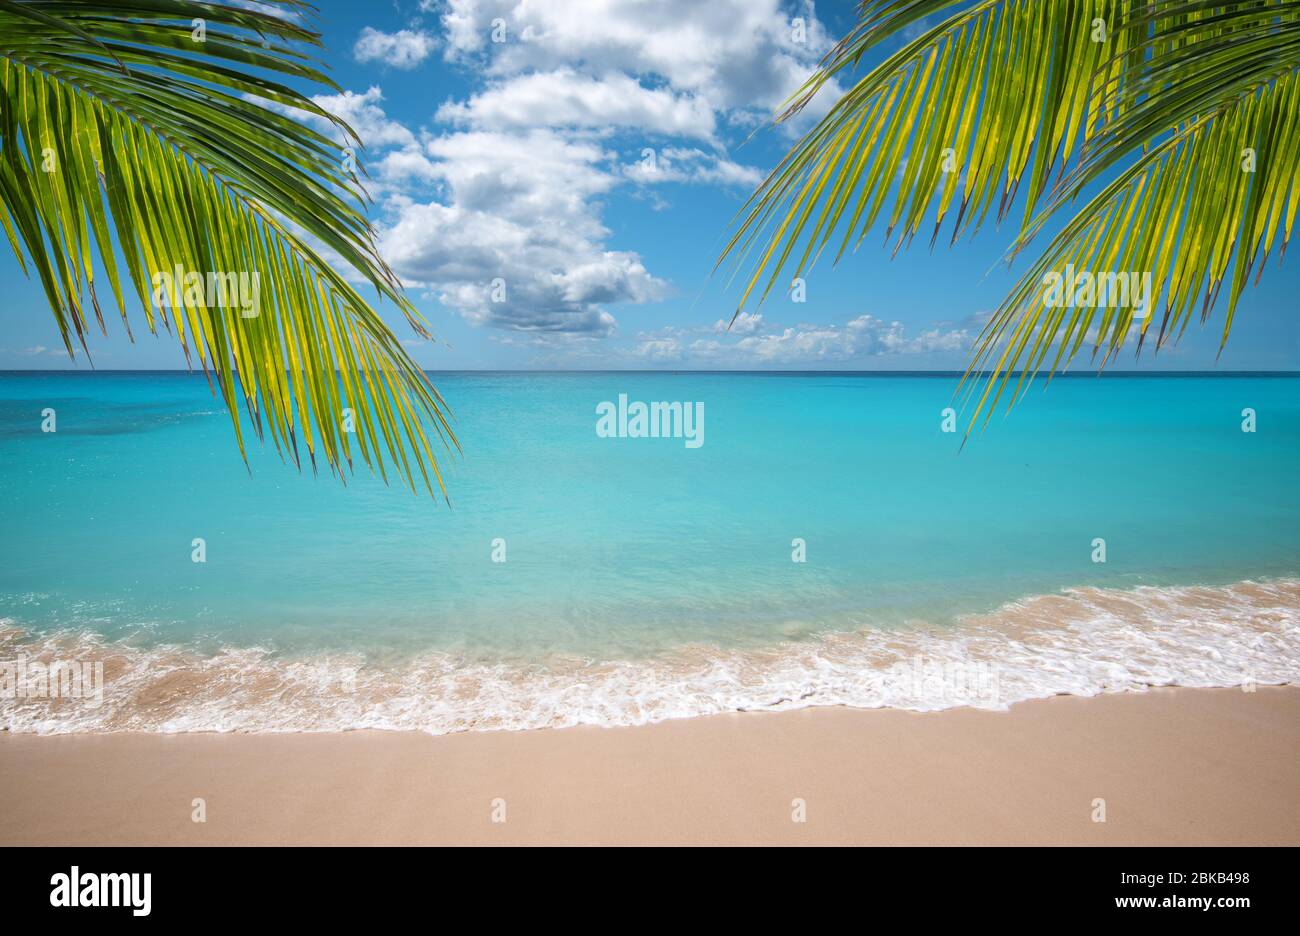 Tropical vacation paradise with white sandy beaches and swaying palm trees. Stock Photo